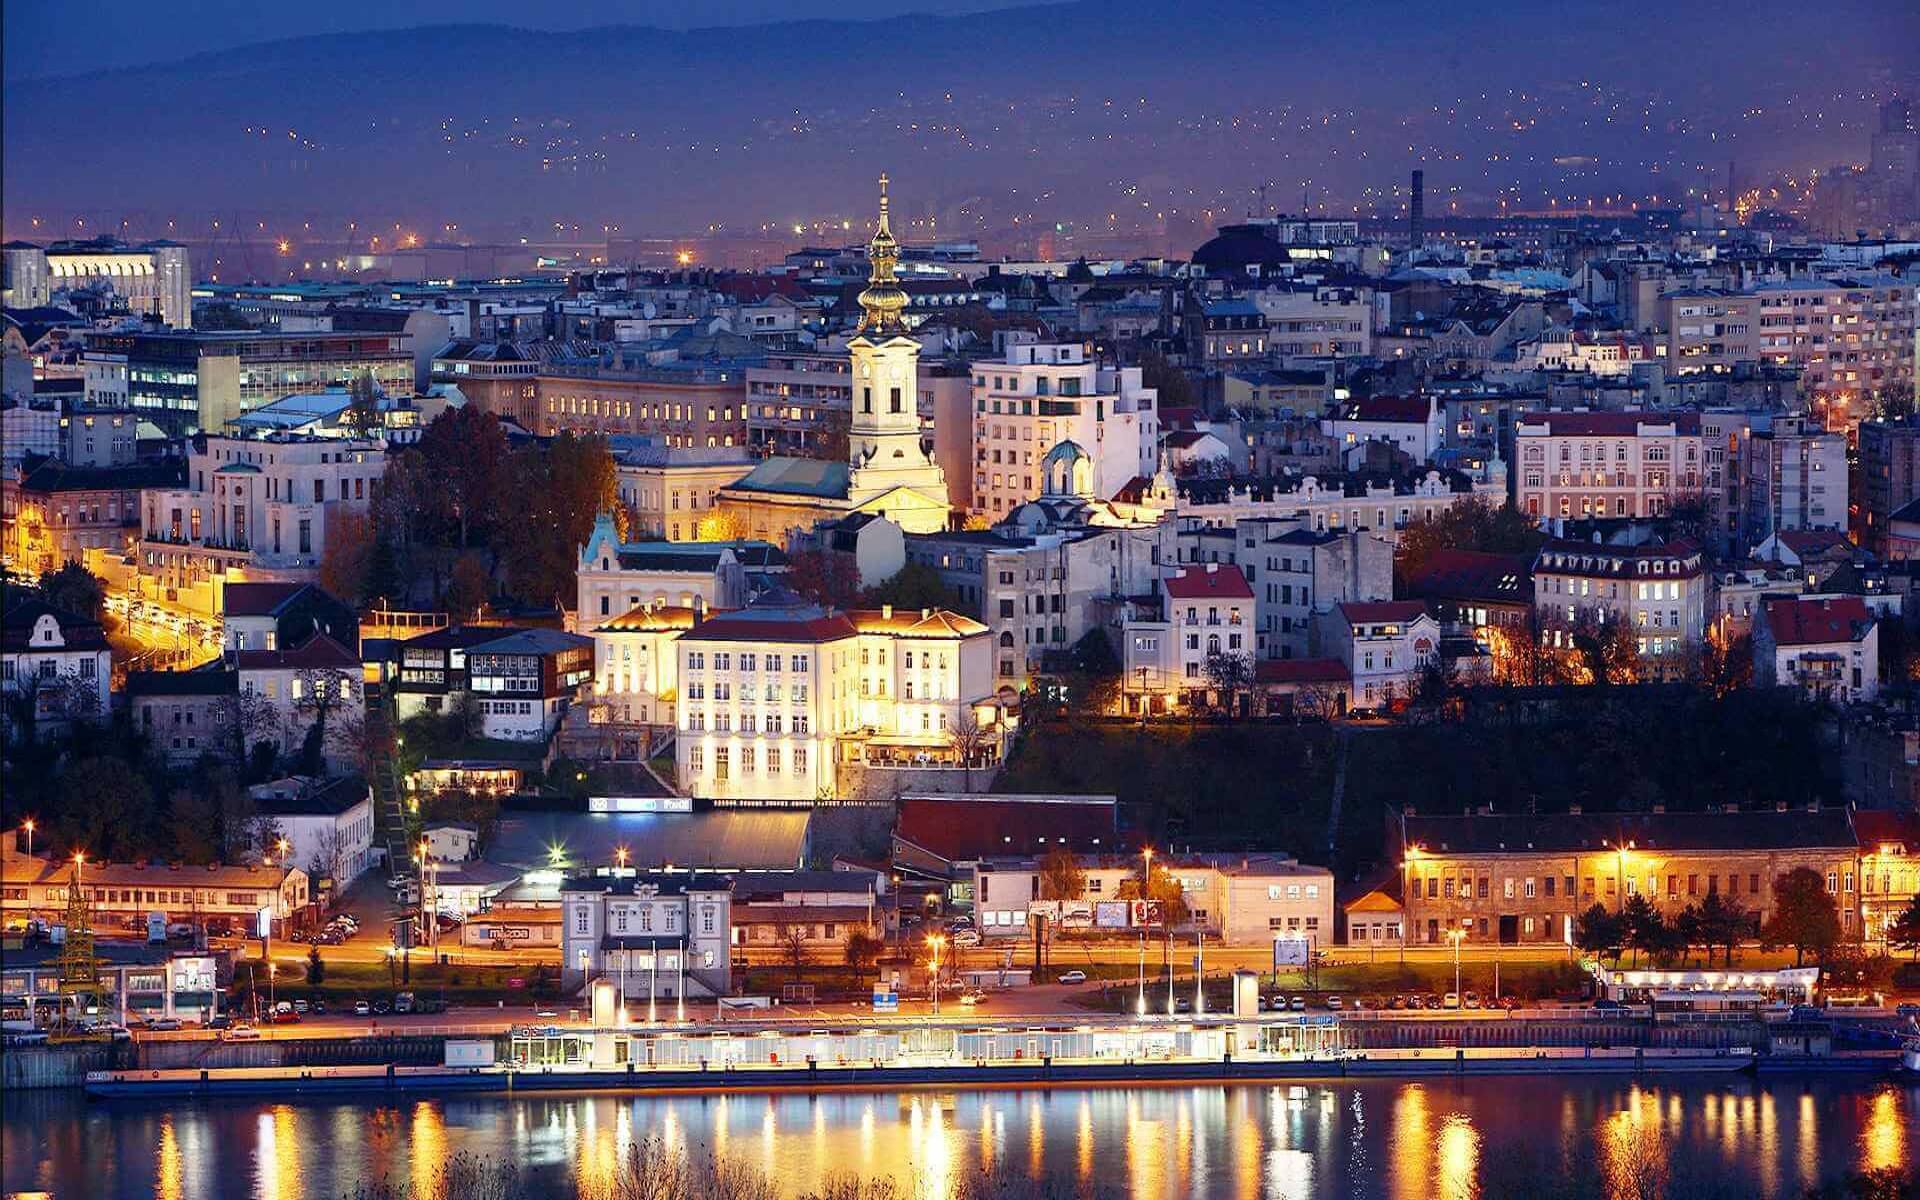 BELGRADE - One of the most culturally vibrant cities in Europe